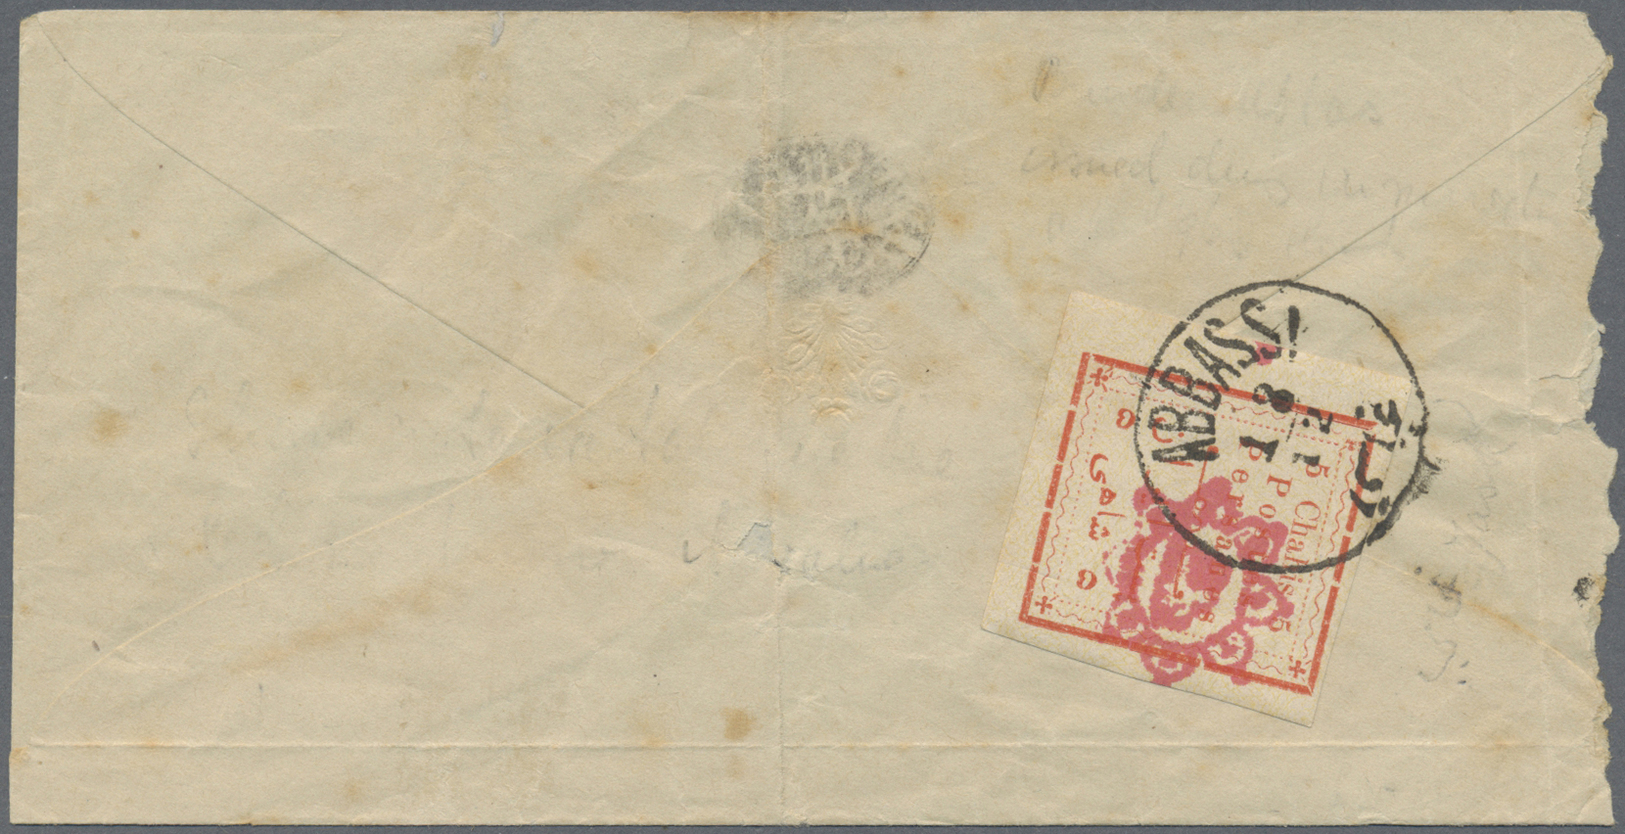 Br Iran: 1902. Local Mail Envelope (faults) Bearing Yvert 150, 5c Scarlet Tied By Abbassi Date Stamp. Very Fine. - Iran